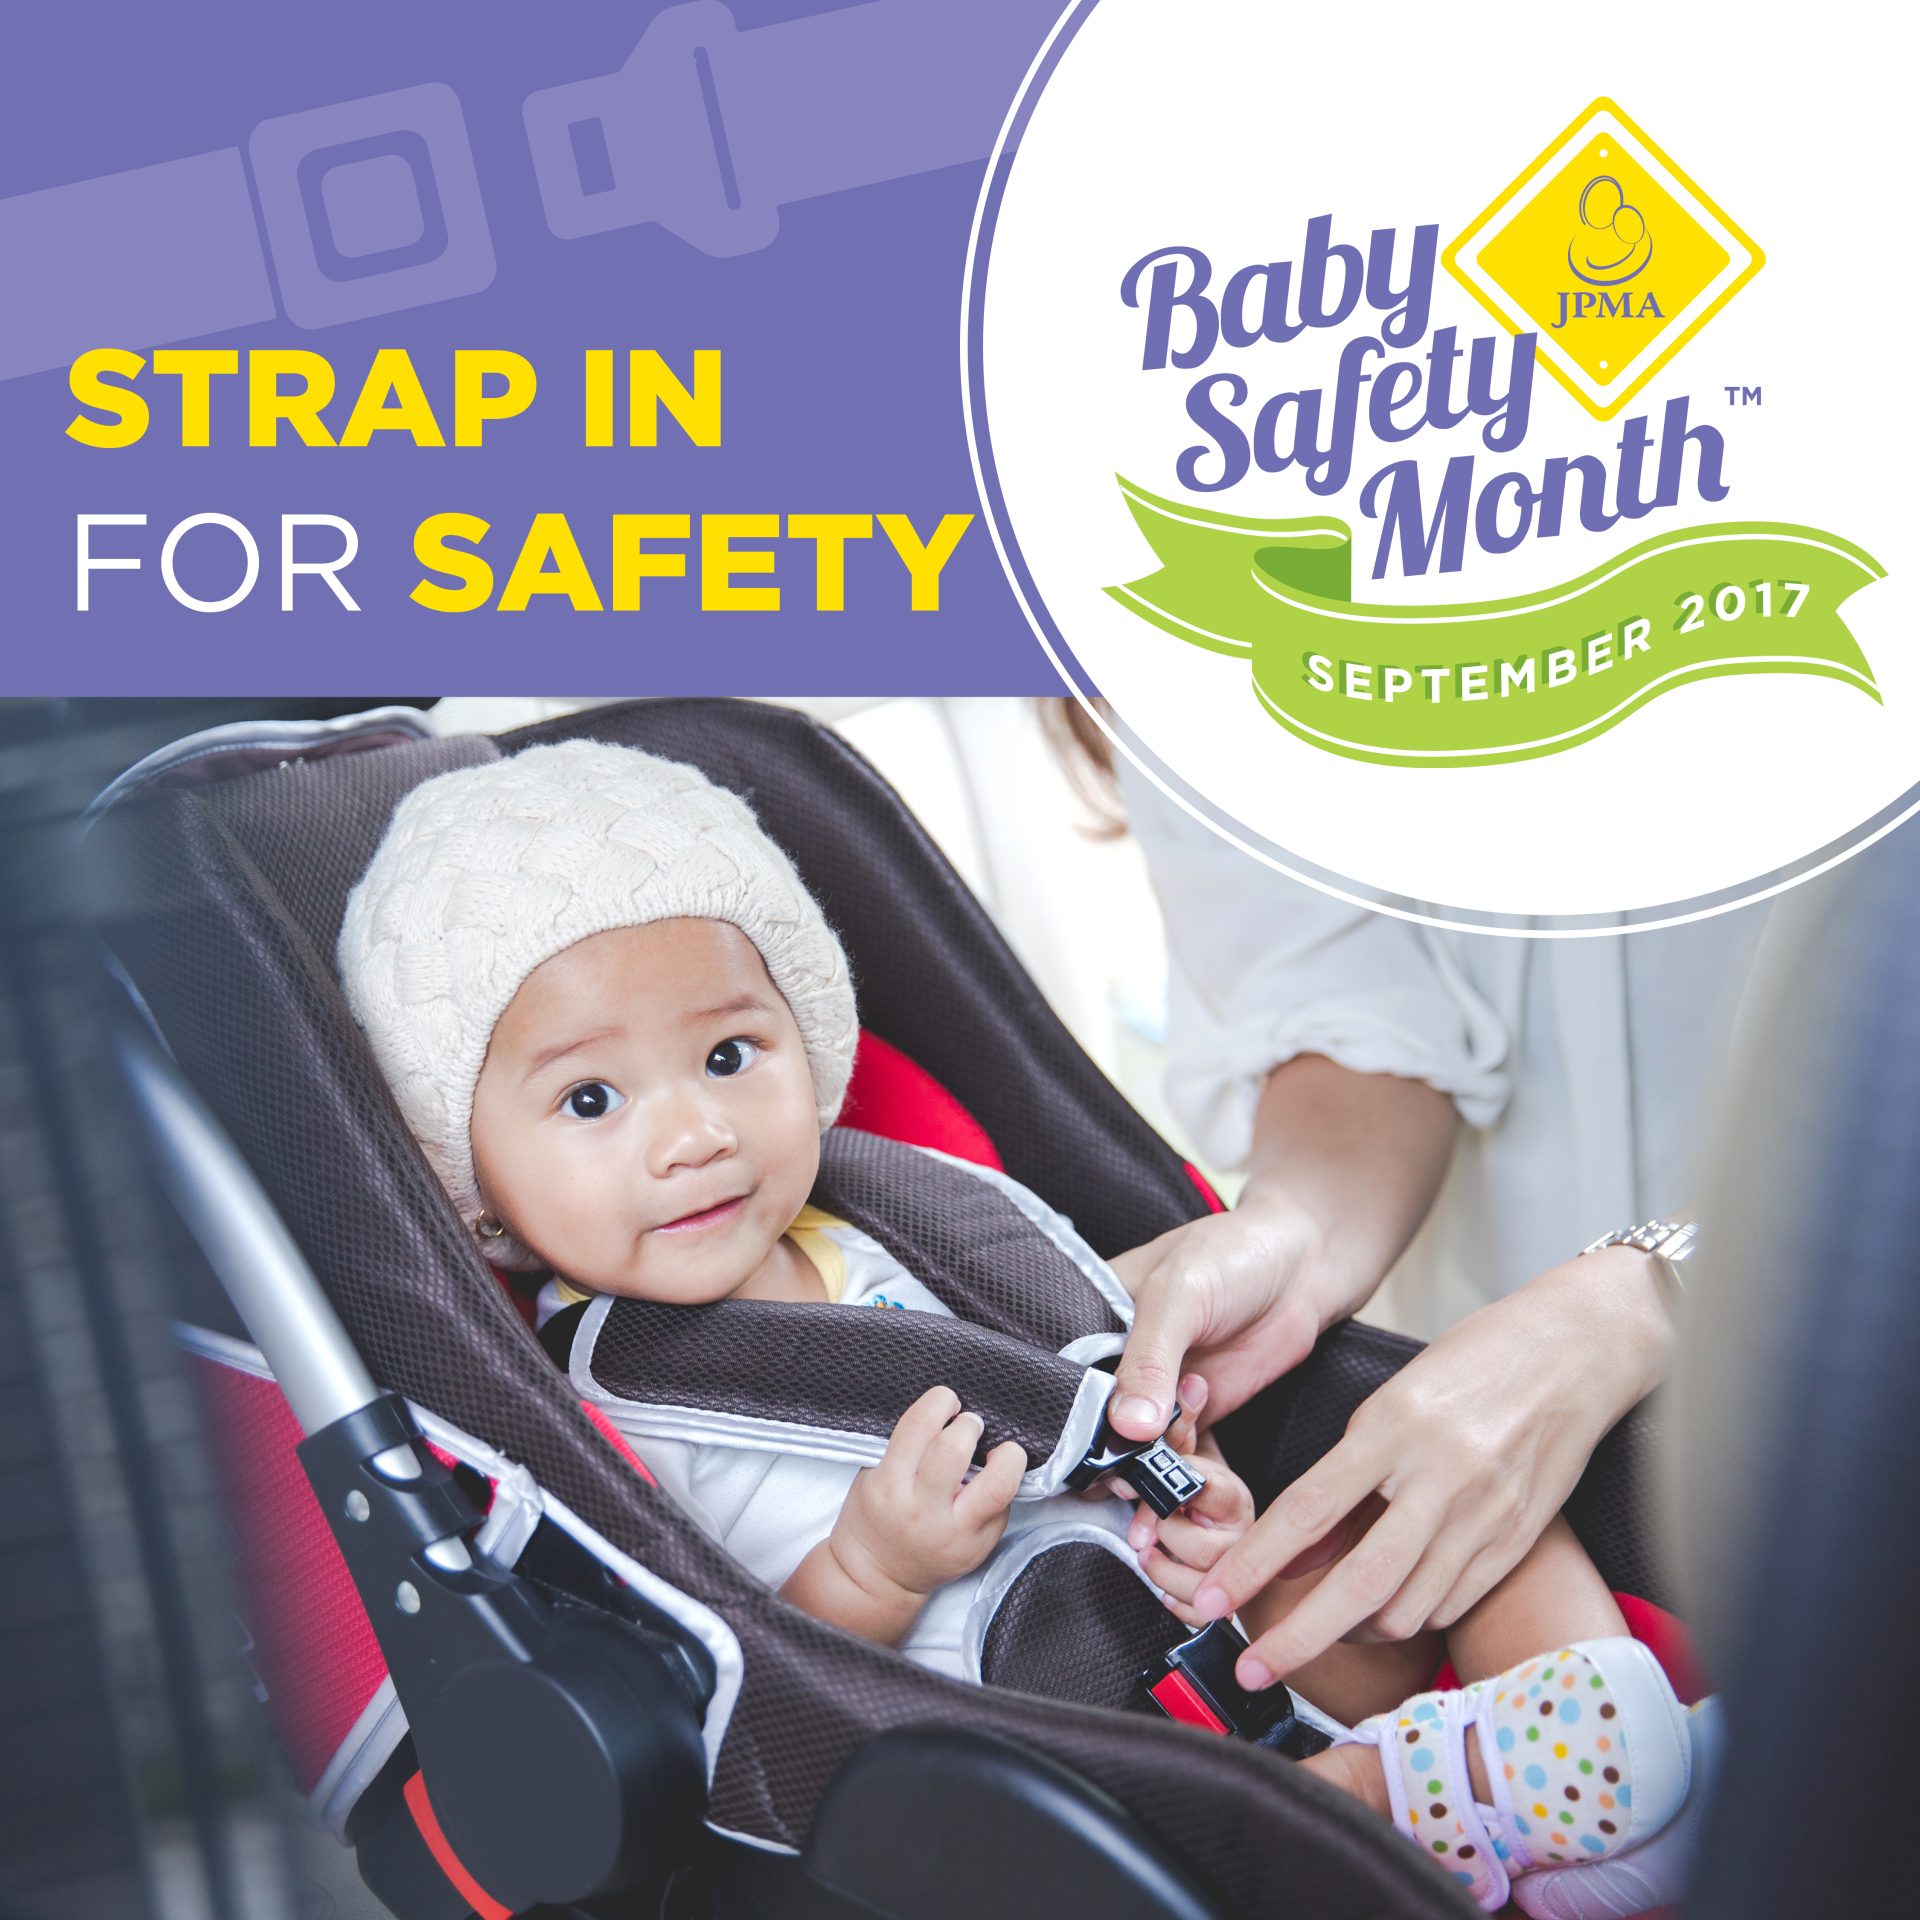 Baby Safety Month: Take the JPMA Carseat Challenge